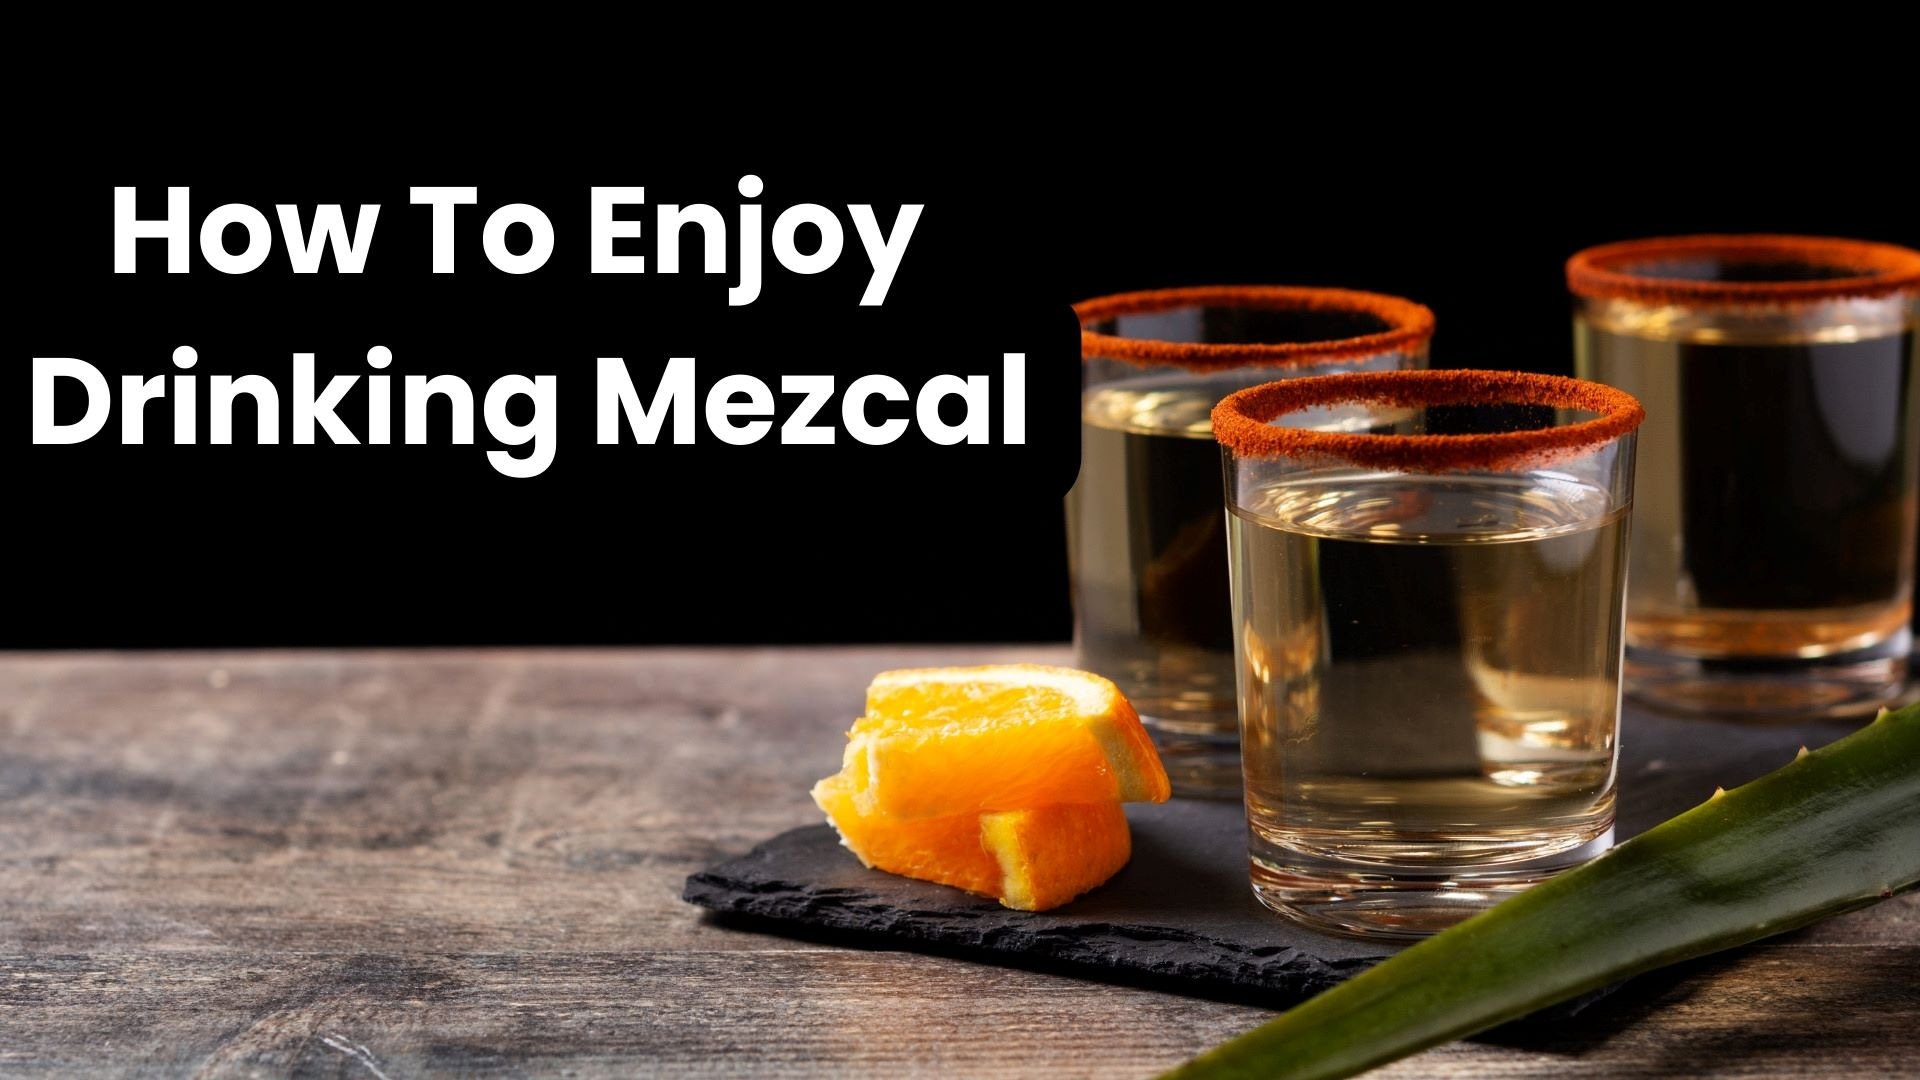 How To Drink Mezcal: Tips And Recommendations